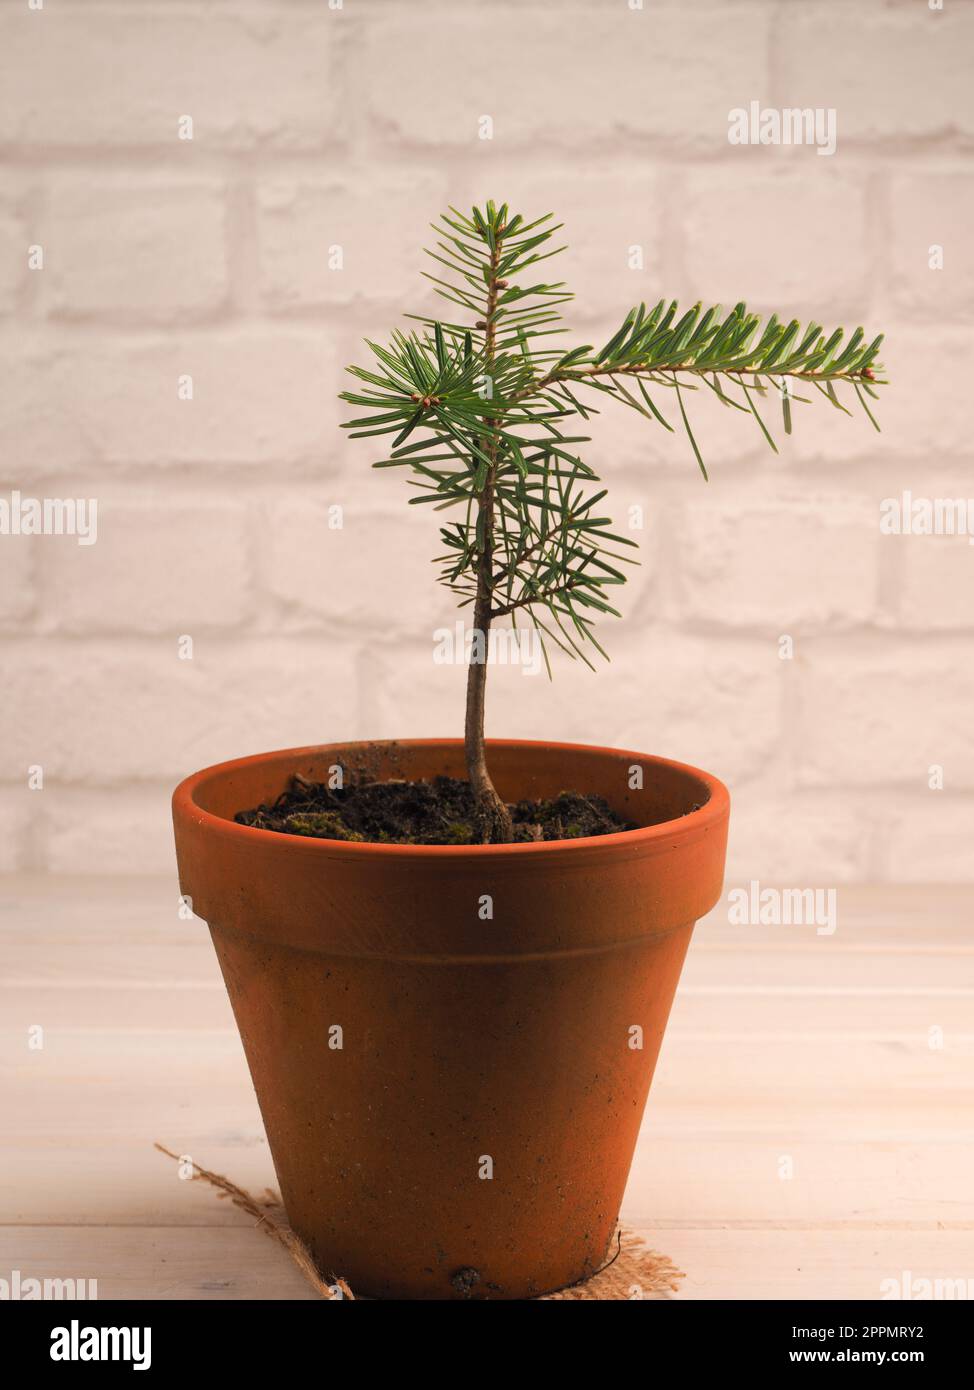 Small fir tree growing in a pot, reforestation or cultivation concept, natural carbon dioxide storage against climate change. Stock Photo